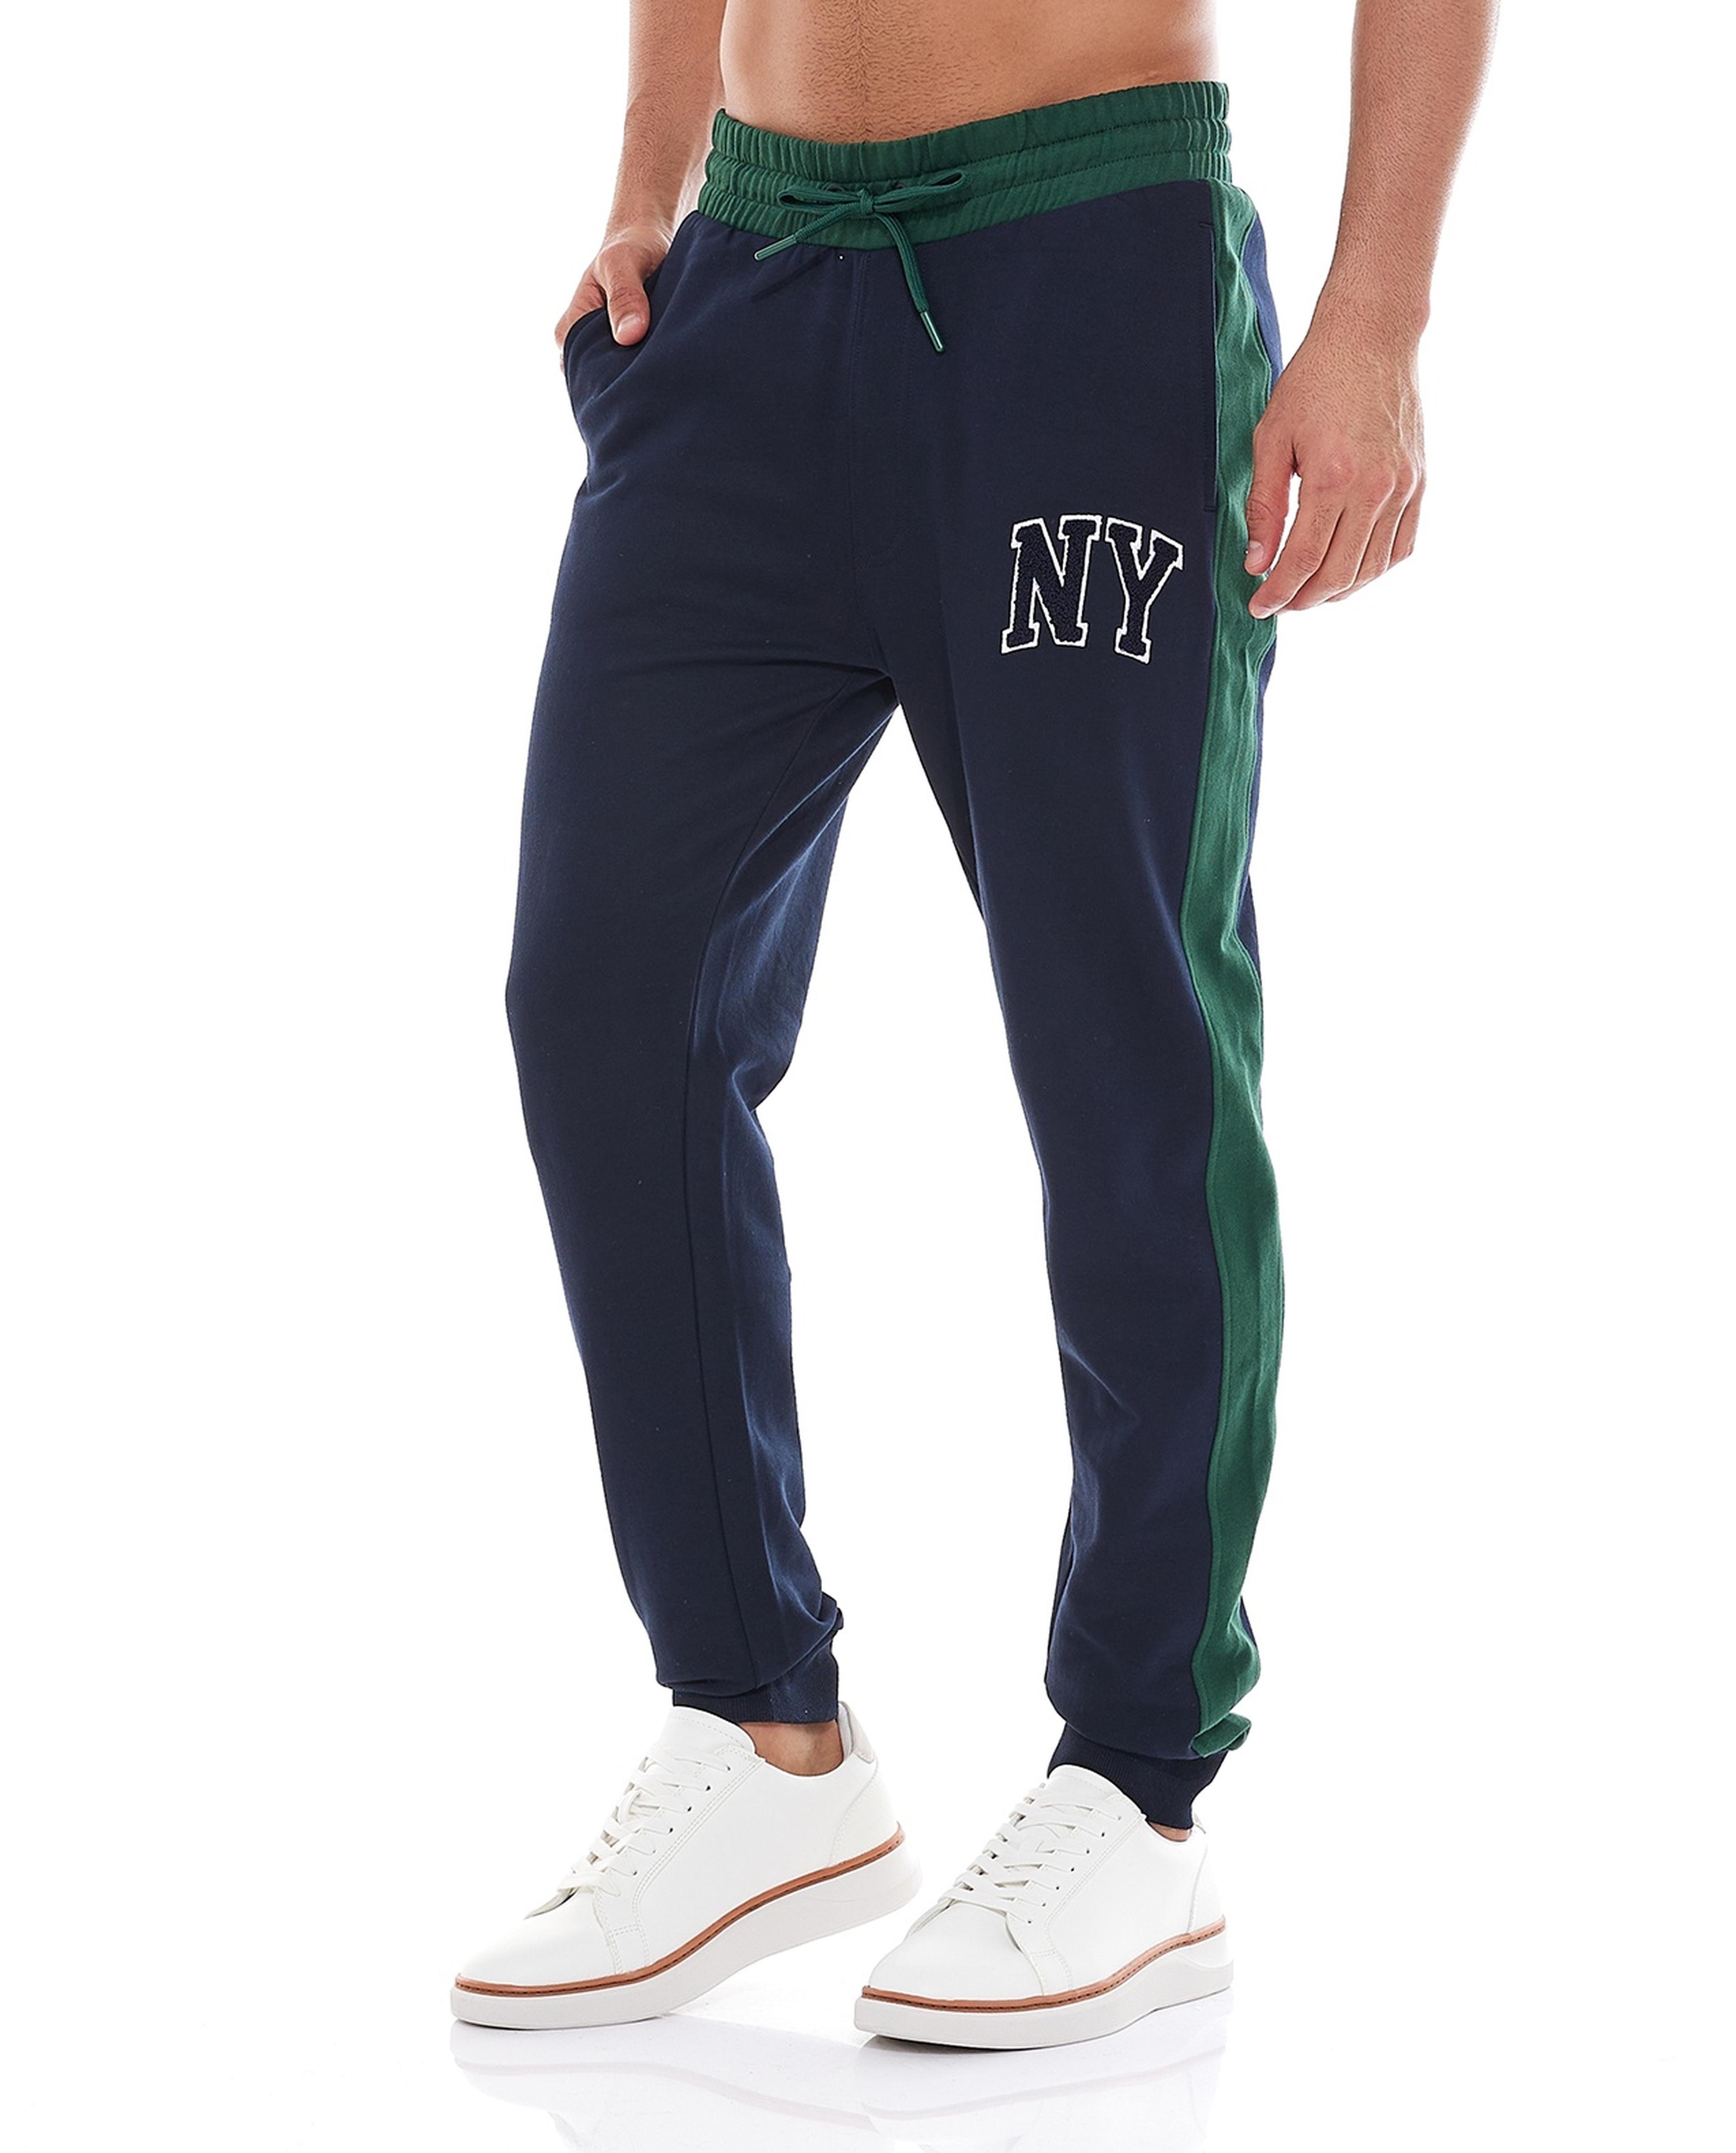 Applique Detail Joggers with Drawstring Waist